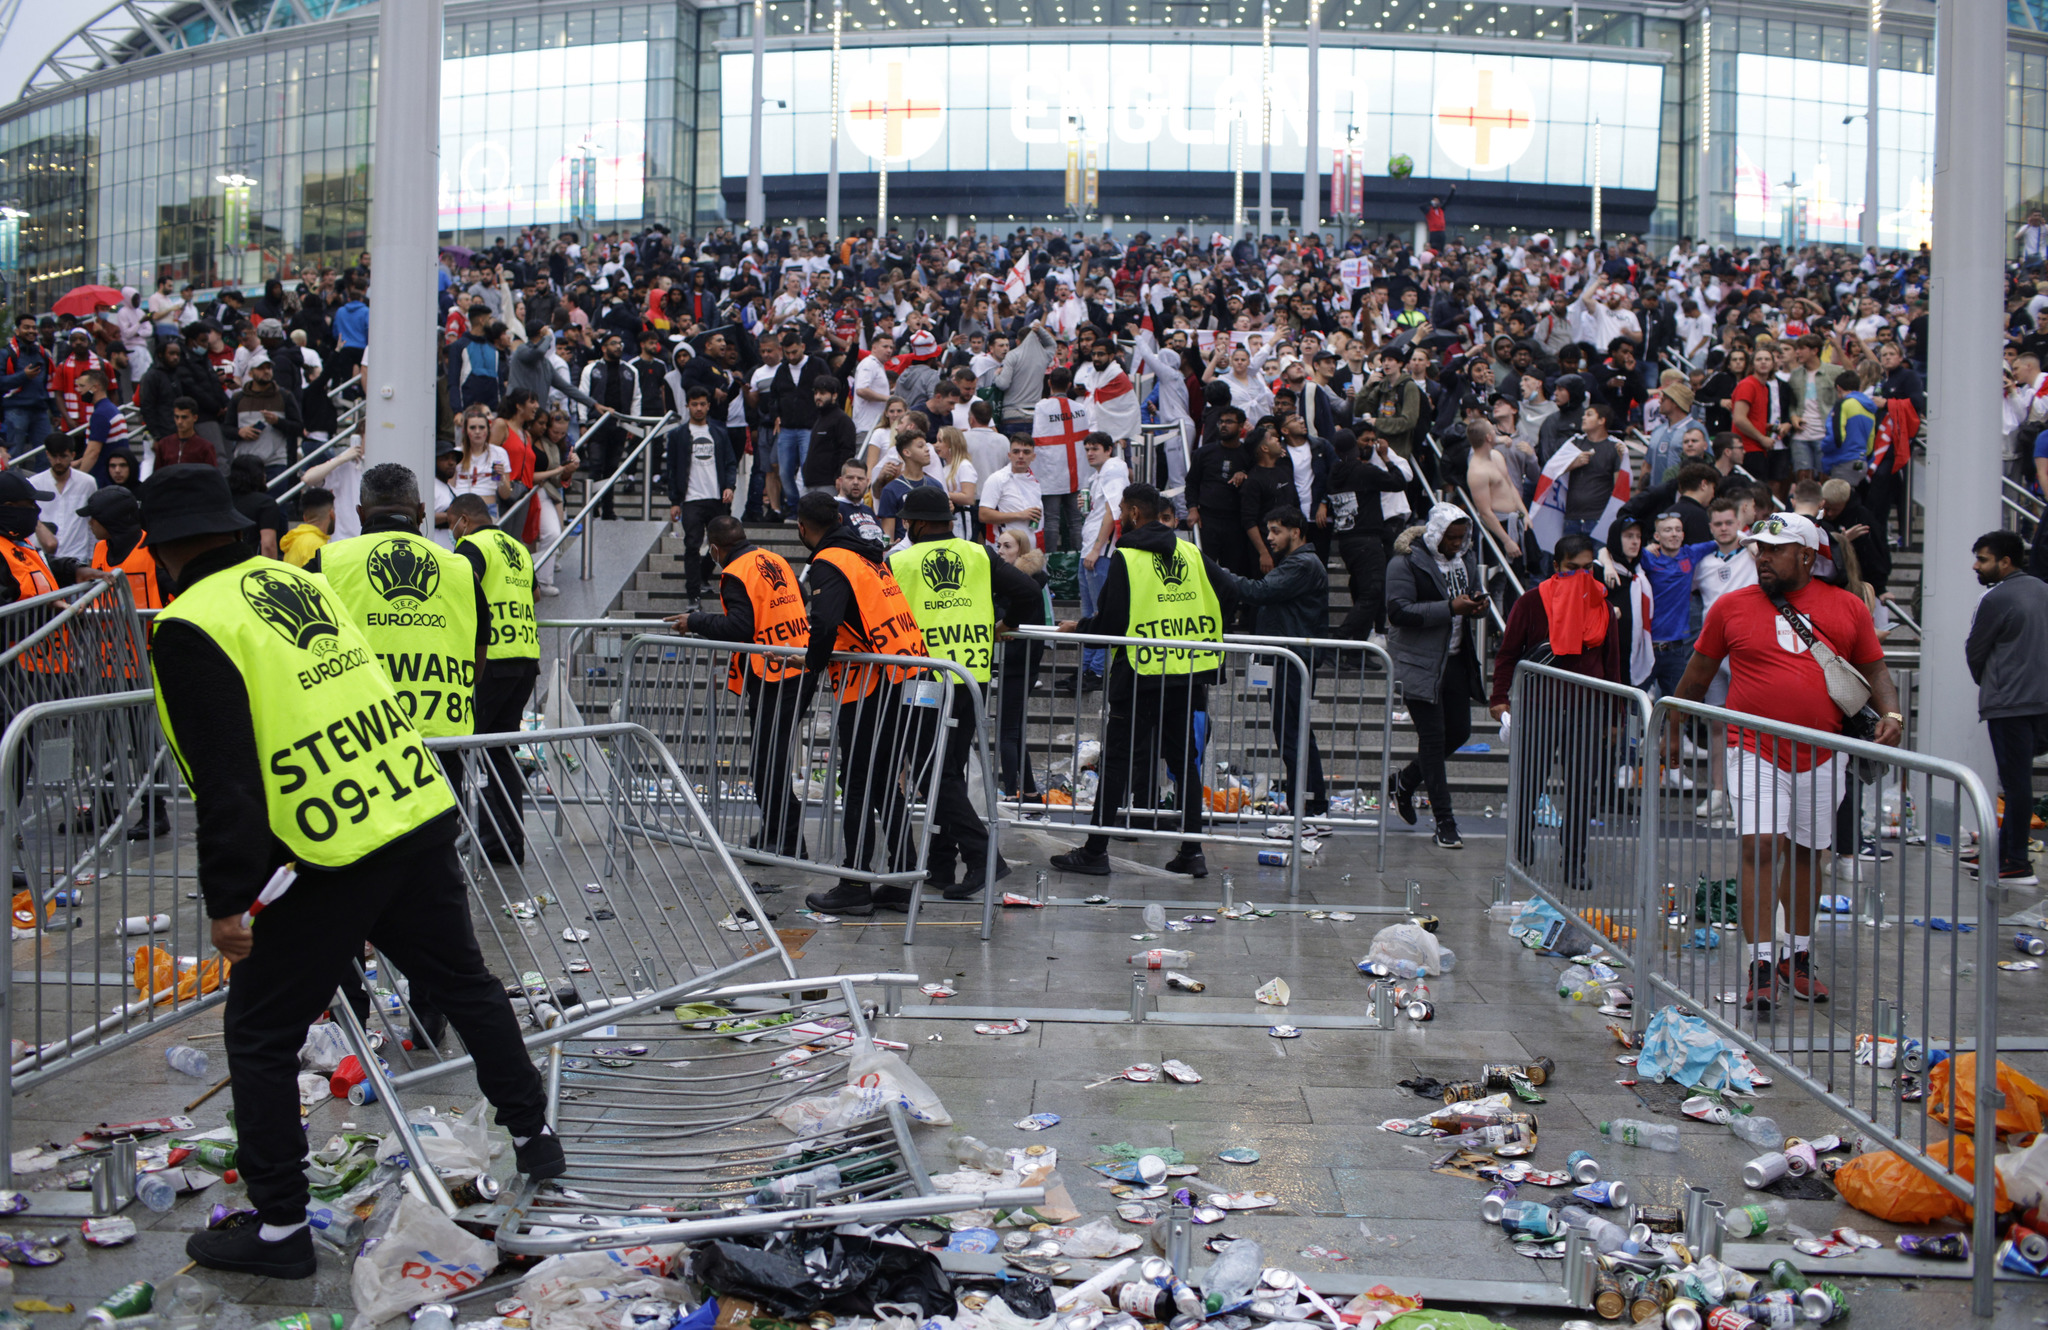 Stewards replace barricades after they were knocked over by supporters outside Wembley Stadium